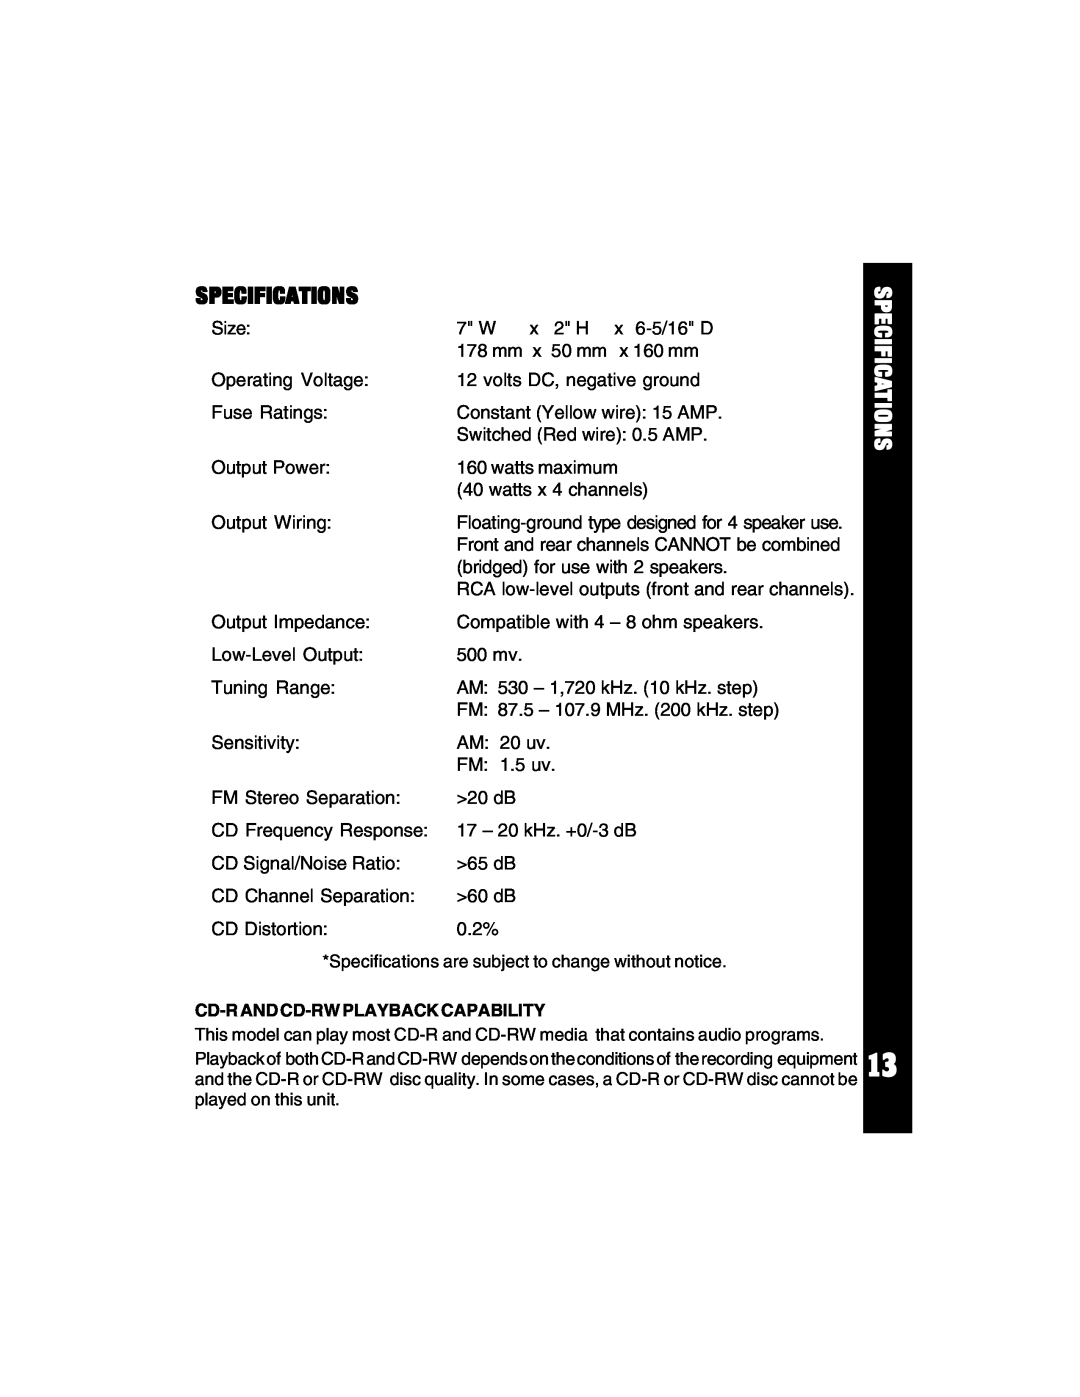 Audiovox ACD88 manual Specifications 